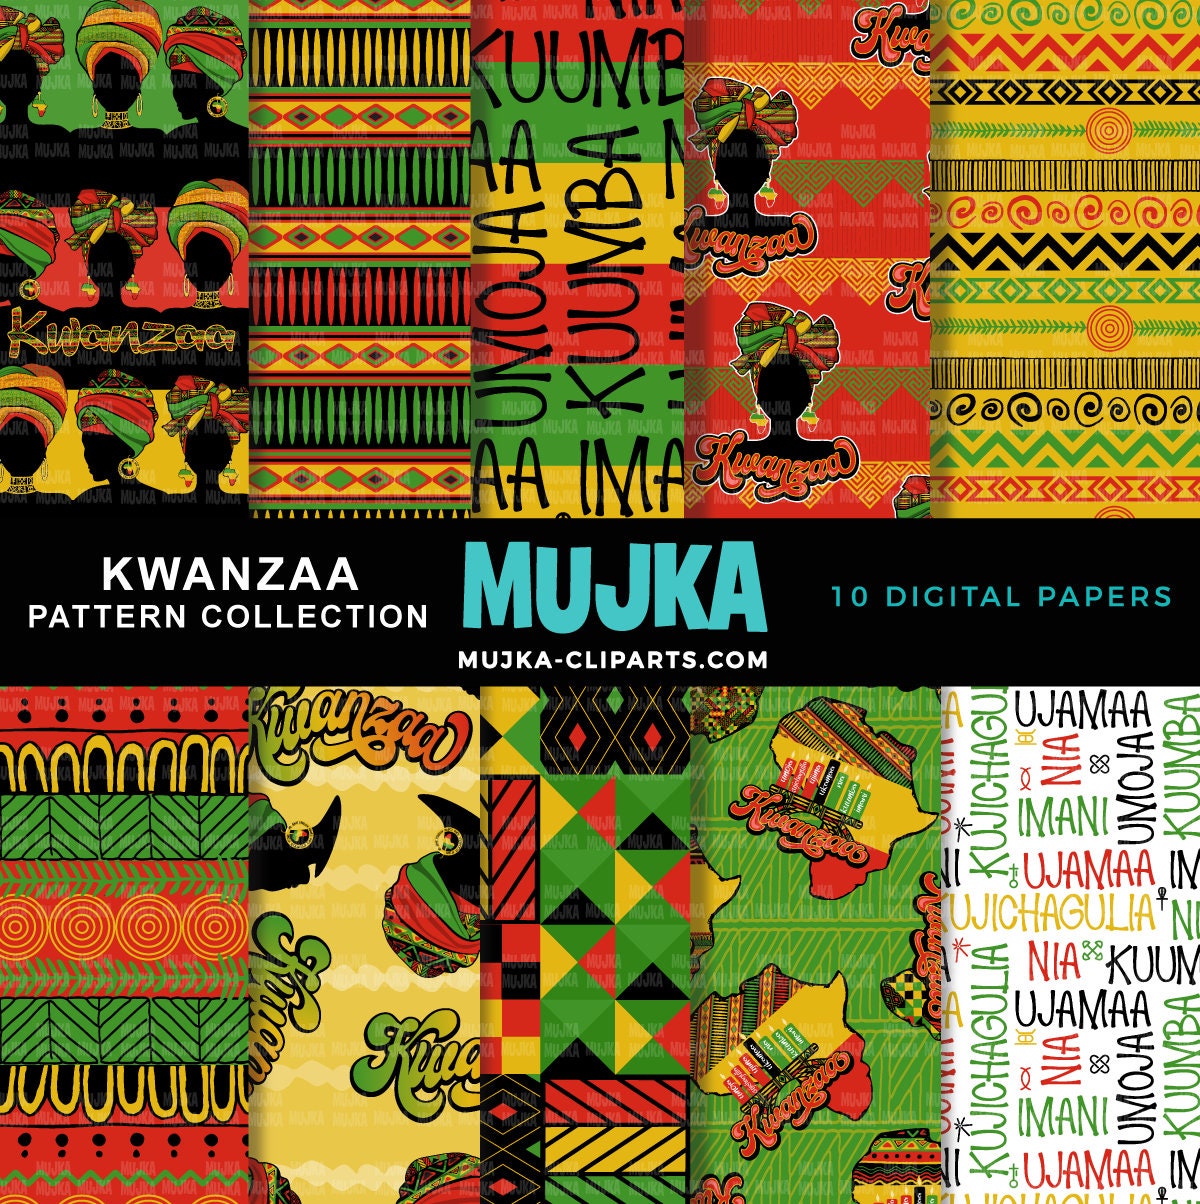 Kwanzaa digital papers, Kwanzaa backgrounds, Kwanzaa digital patterns, Happy Kwanzaa designs, Kwanzaa sublimation designs, African papers, black history